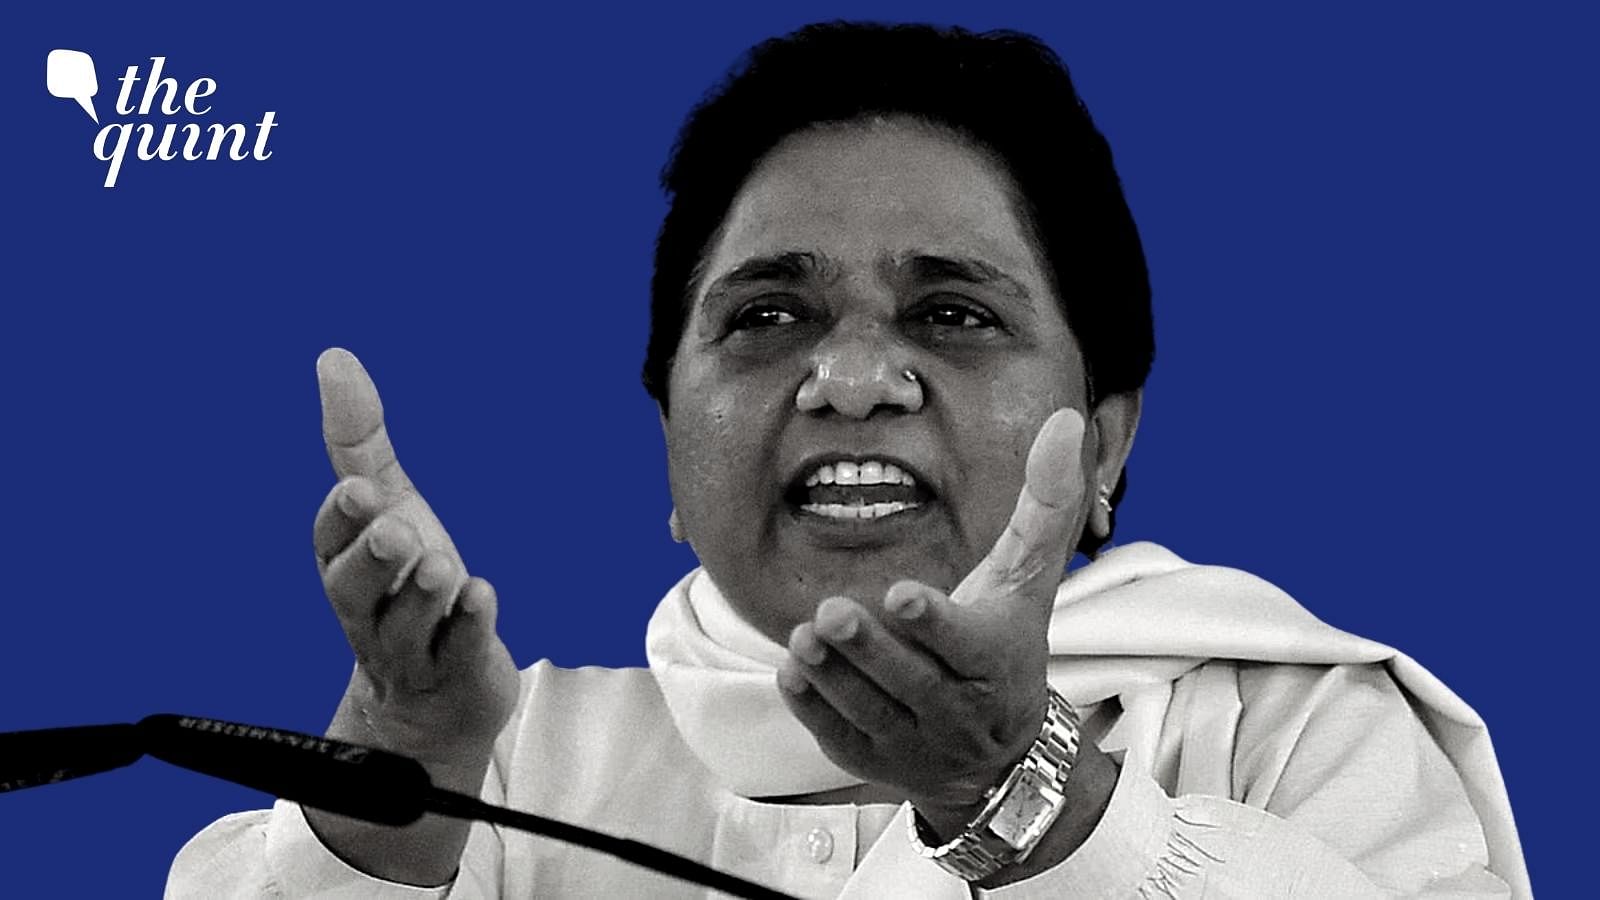 <div class="paragraphs"><p>The BSP has won just 1 seat out of 403 seats in UP, their worst-ever performance in the state.</p></div>